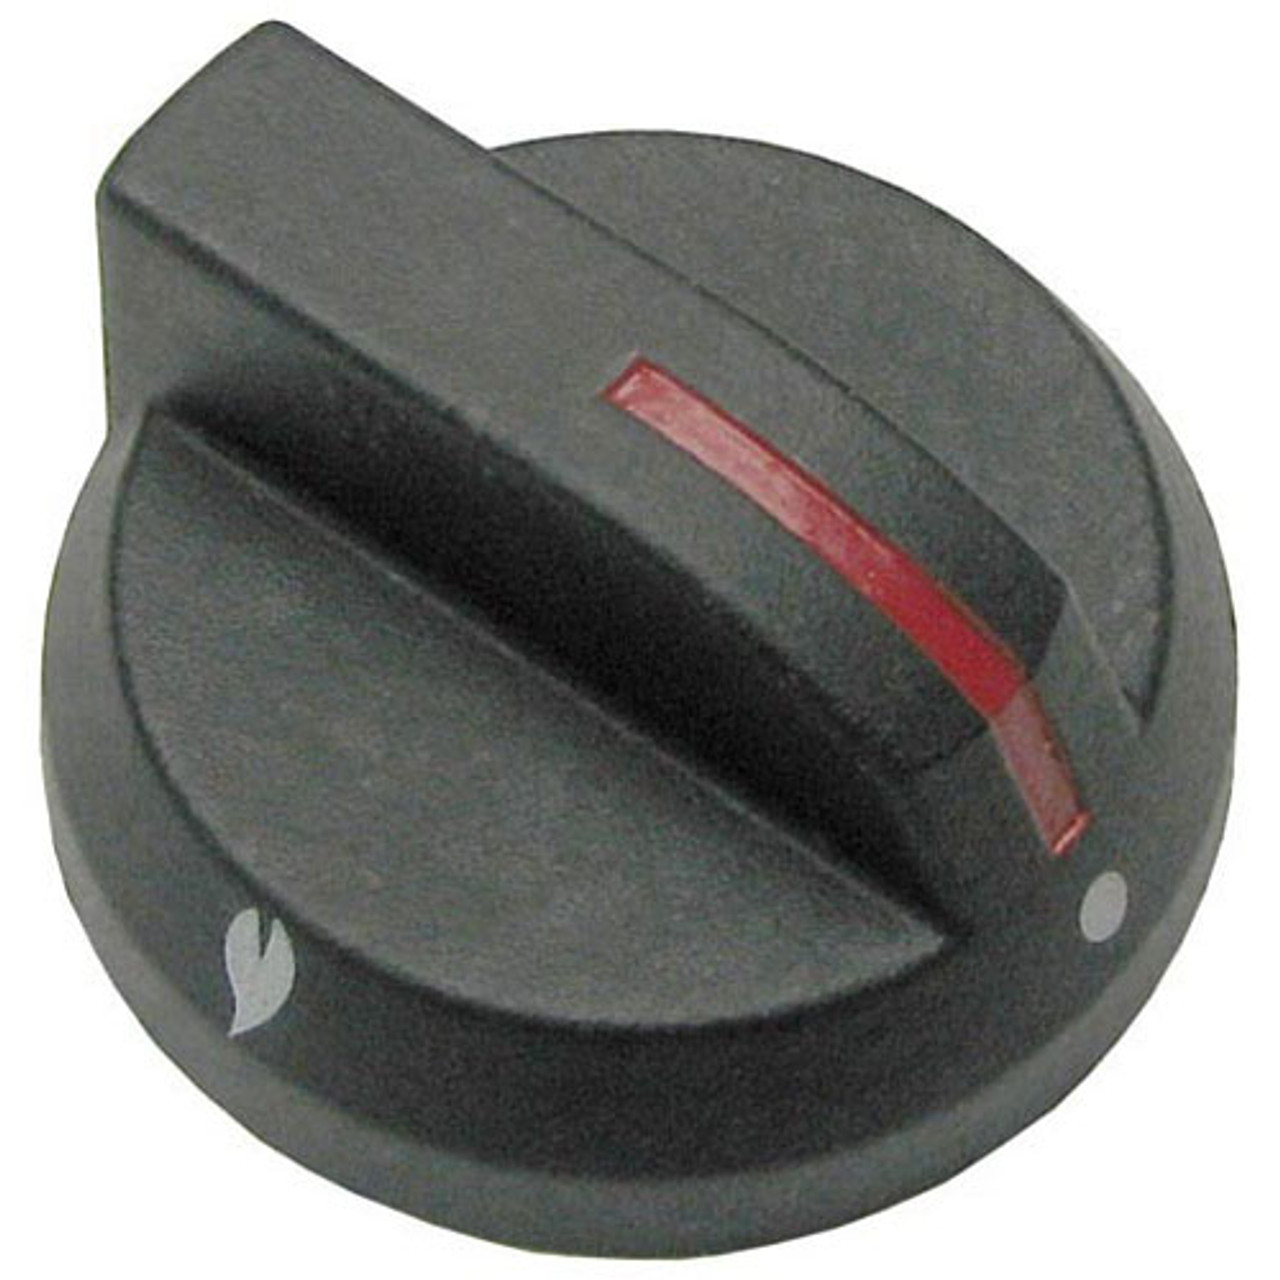 Valve Knob Valve Knob - Replacement Part For Magikitch'N 35-01-10323-A